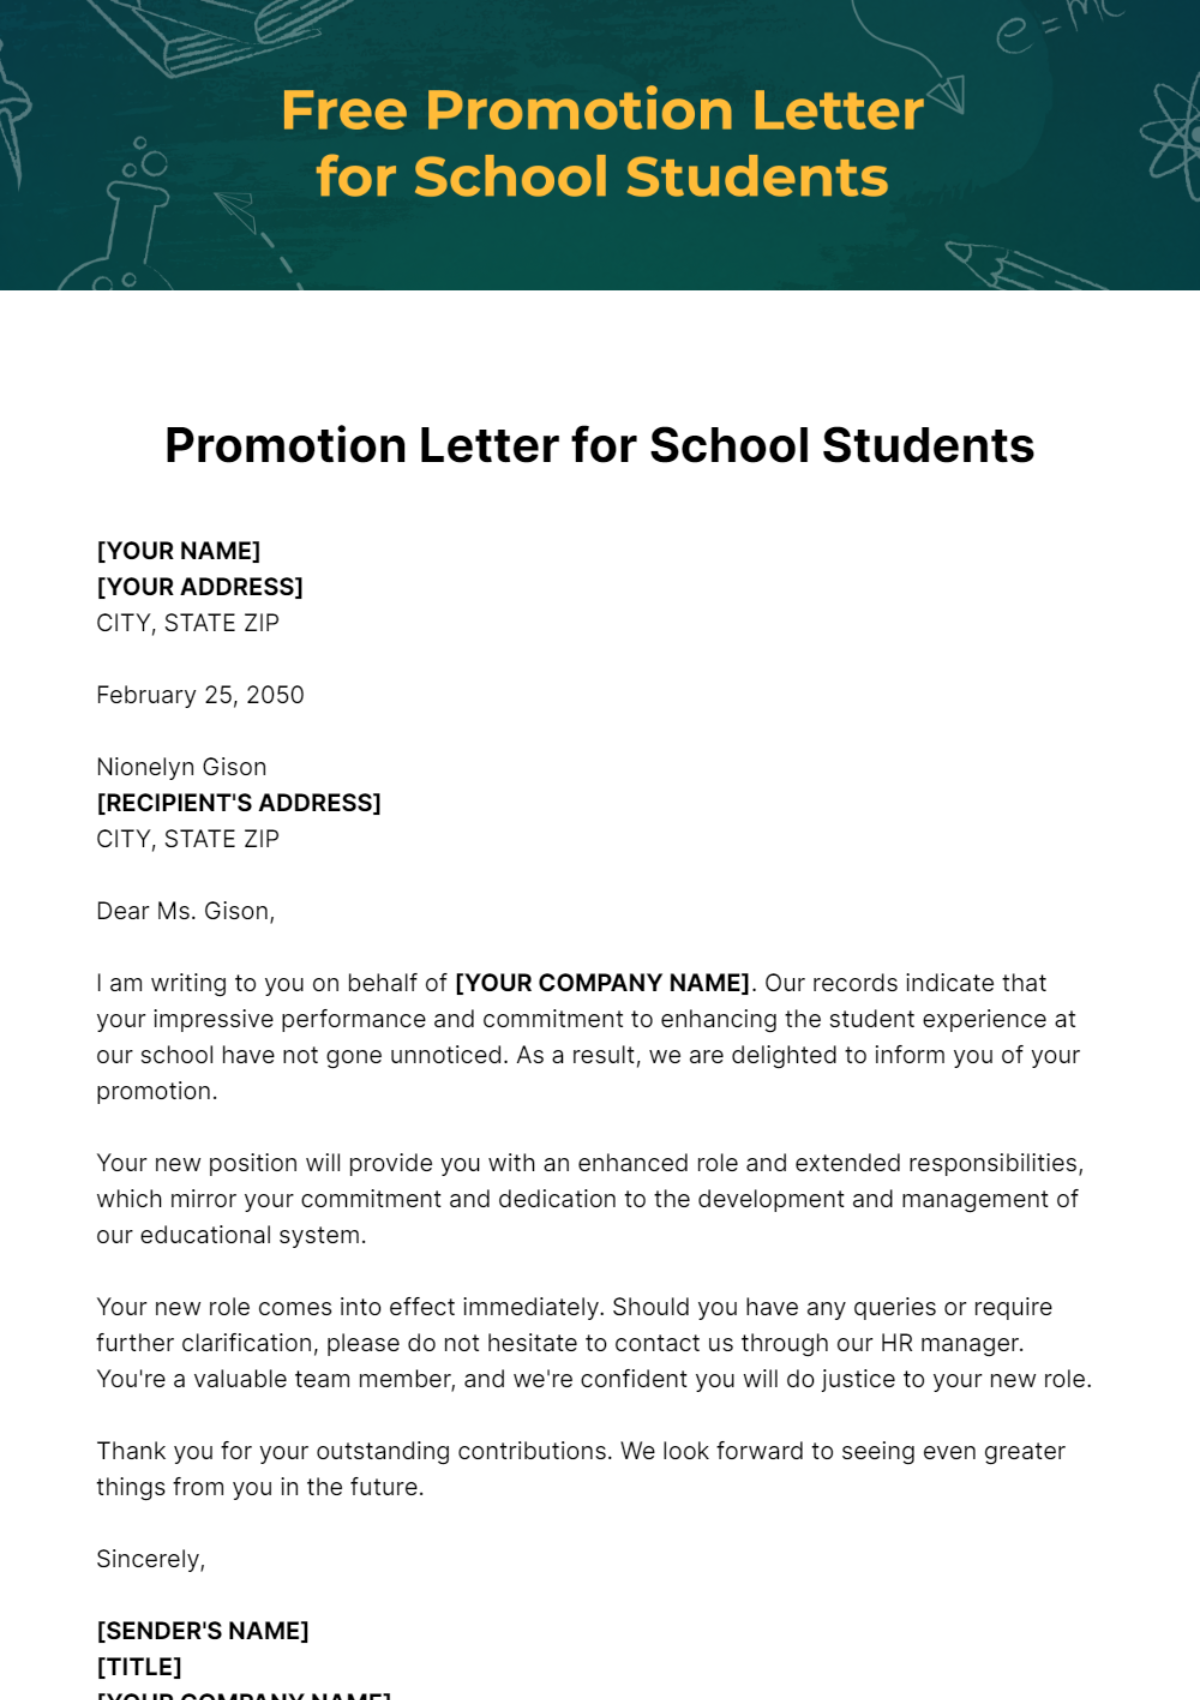 Free Promotion Letter for School Students Template